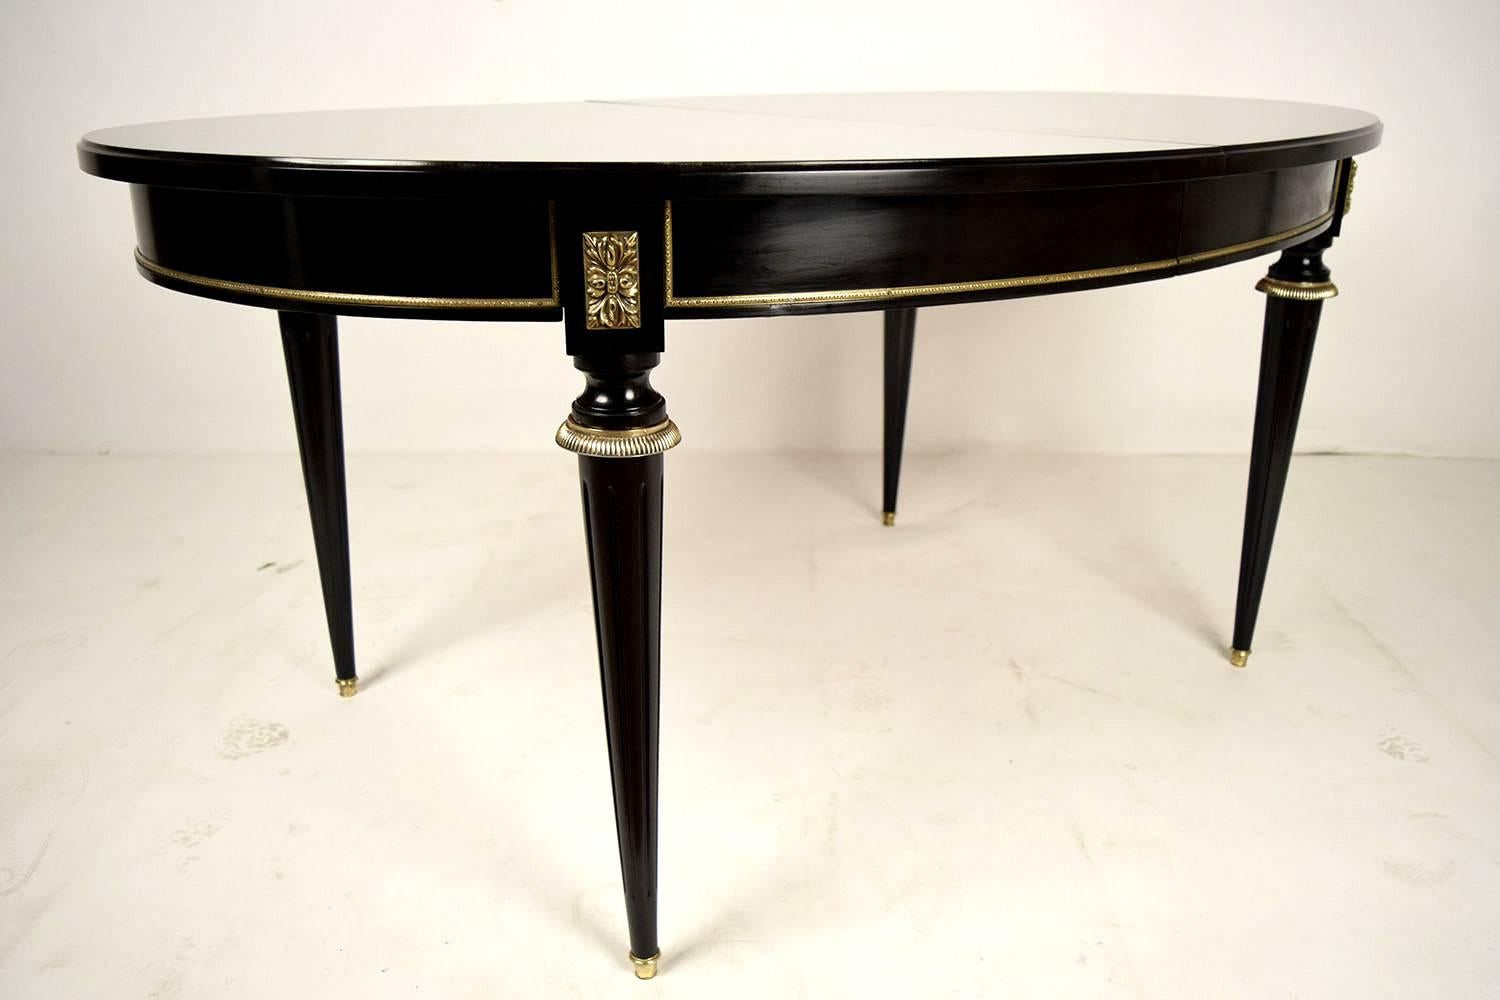 Carved French Louis XVI-style Ebonized Oval Dining Table